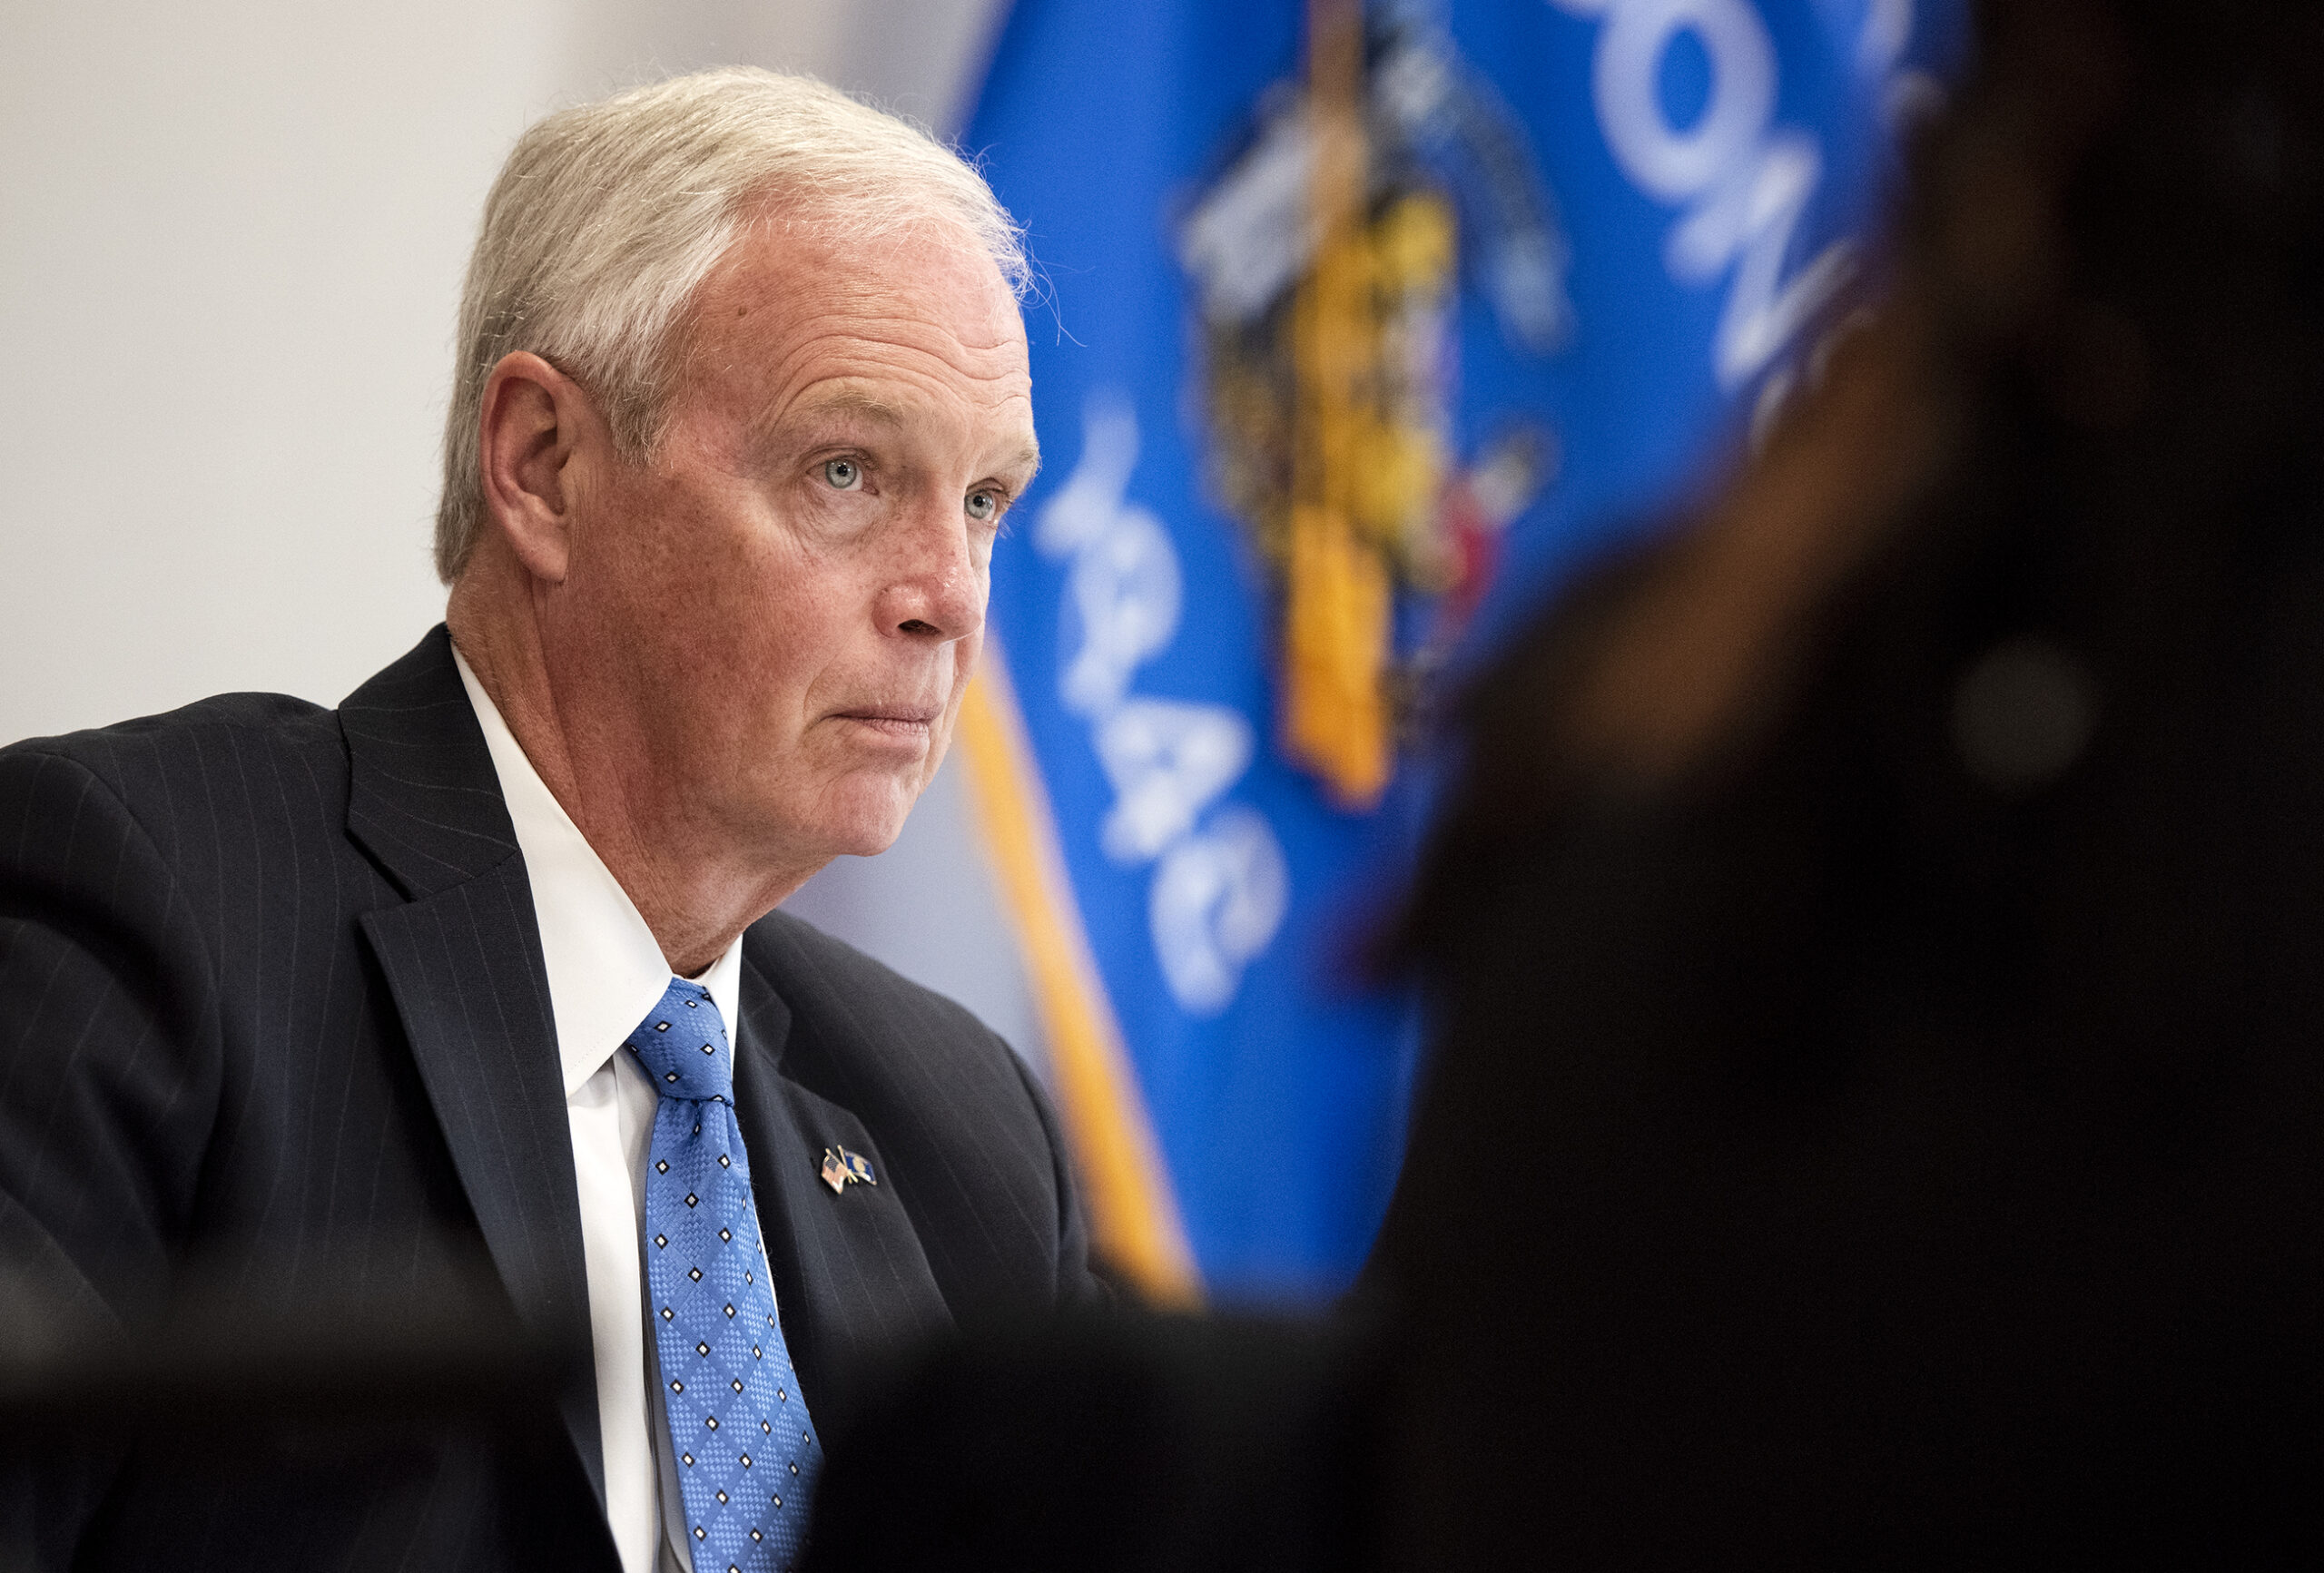 Sen. Ron Johnson is seen in front of a Wisconsin state flag at a press conference.